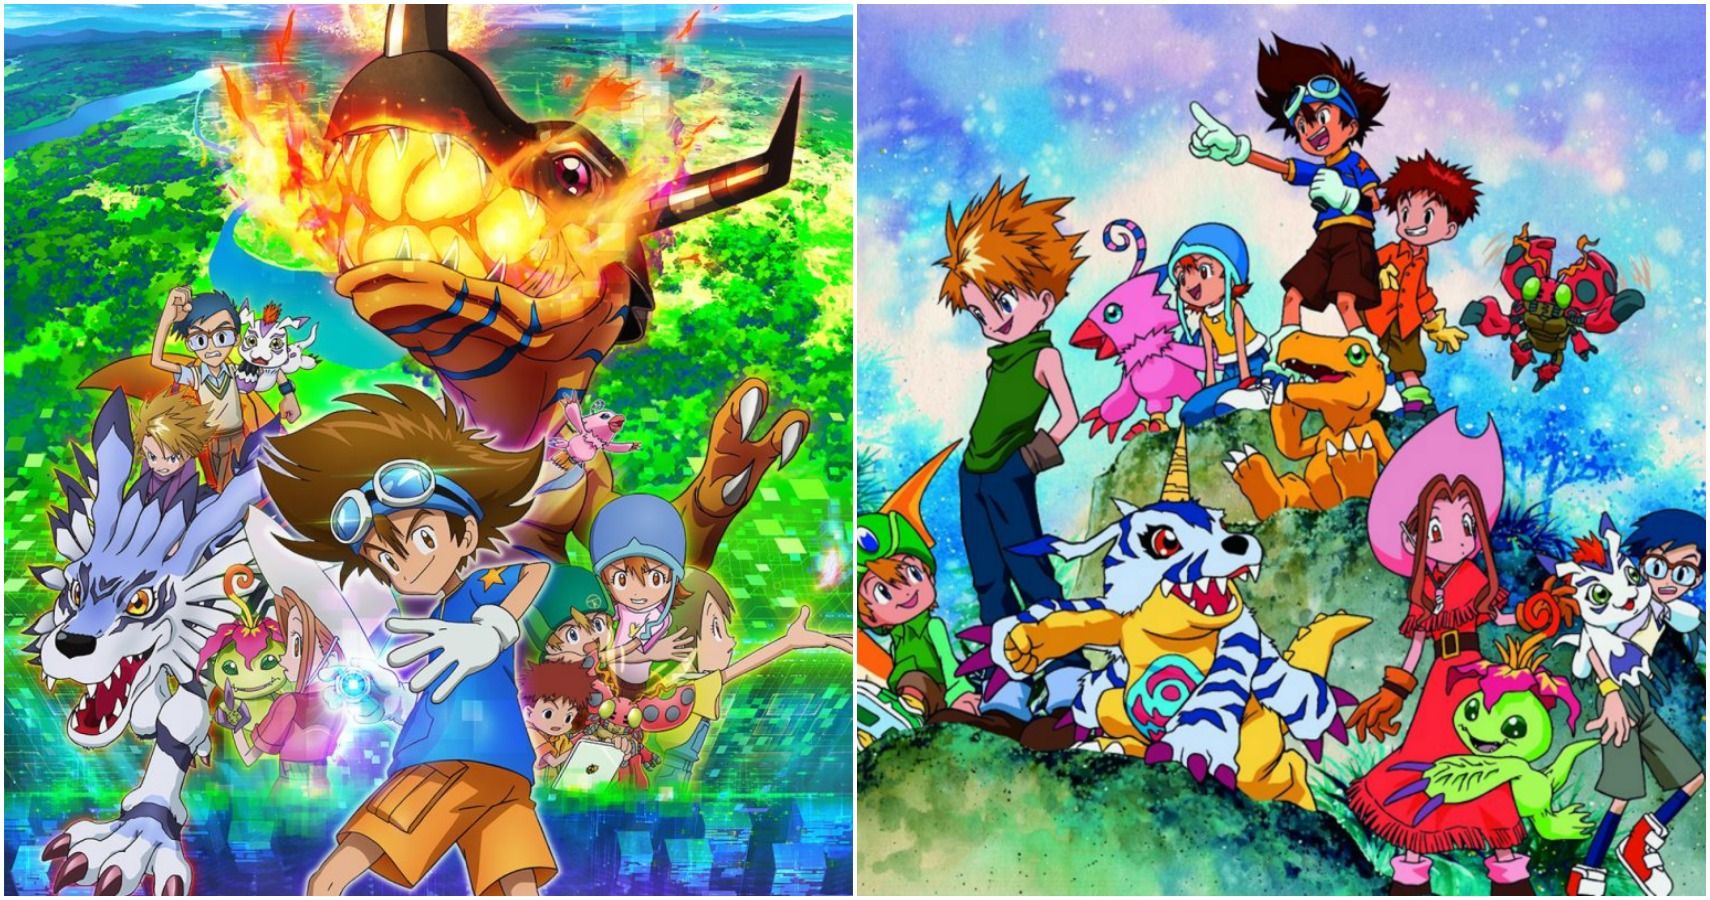 What's the difference between Digimon Adventure 1999 and Digimon